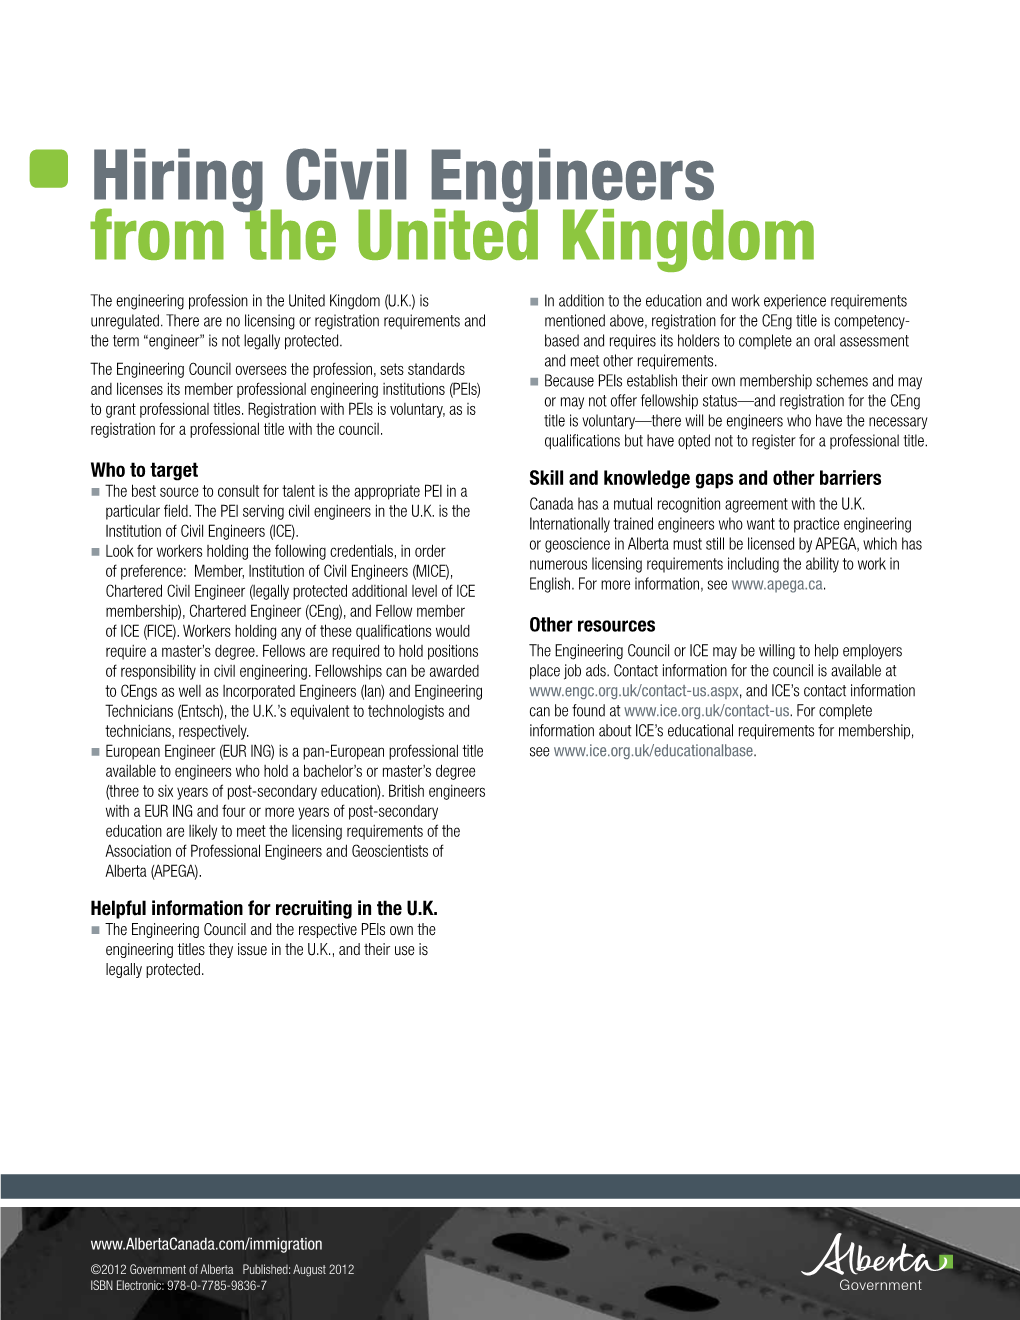 Hiring Civil Engineers from the United Kingdom